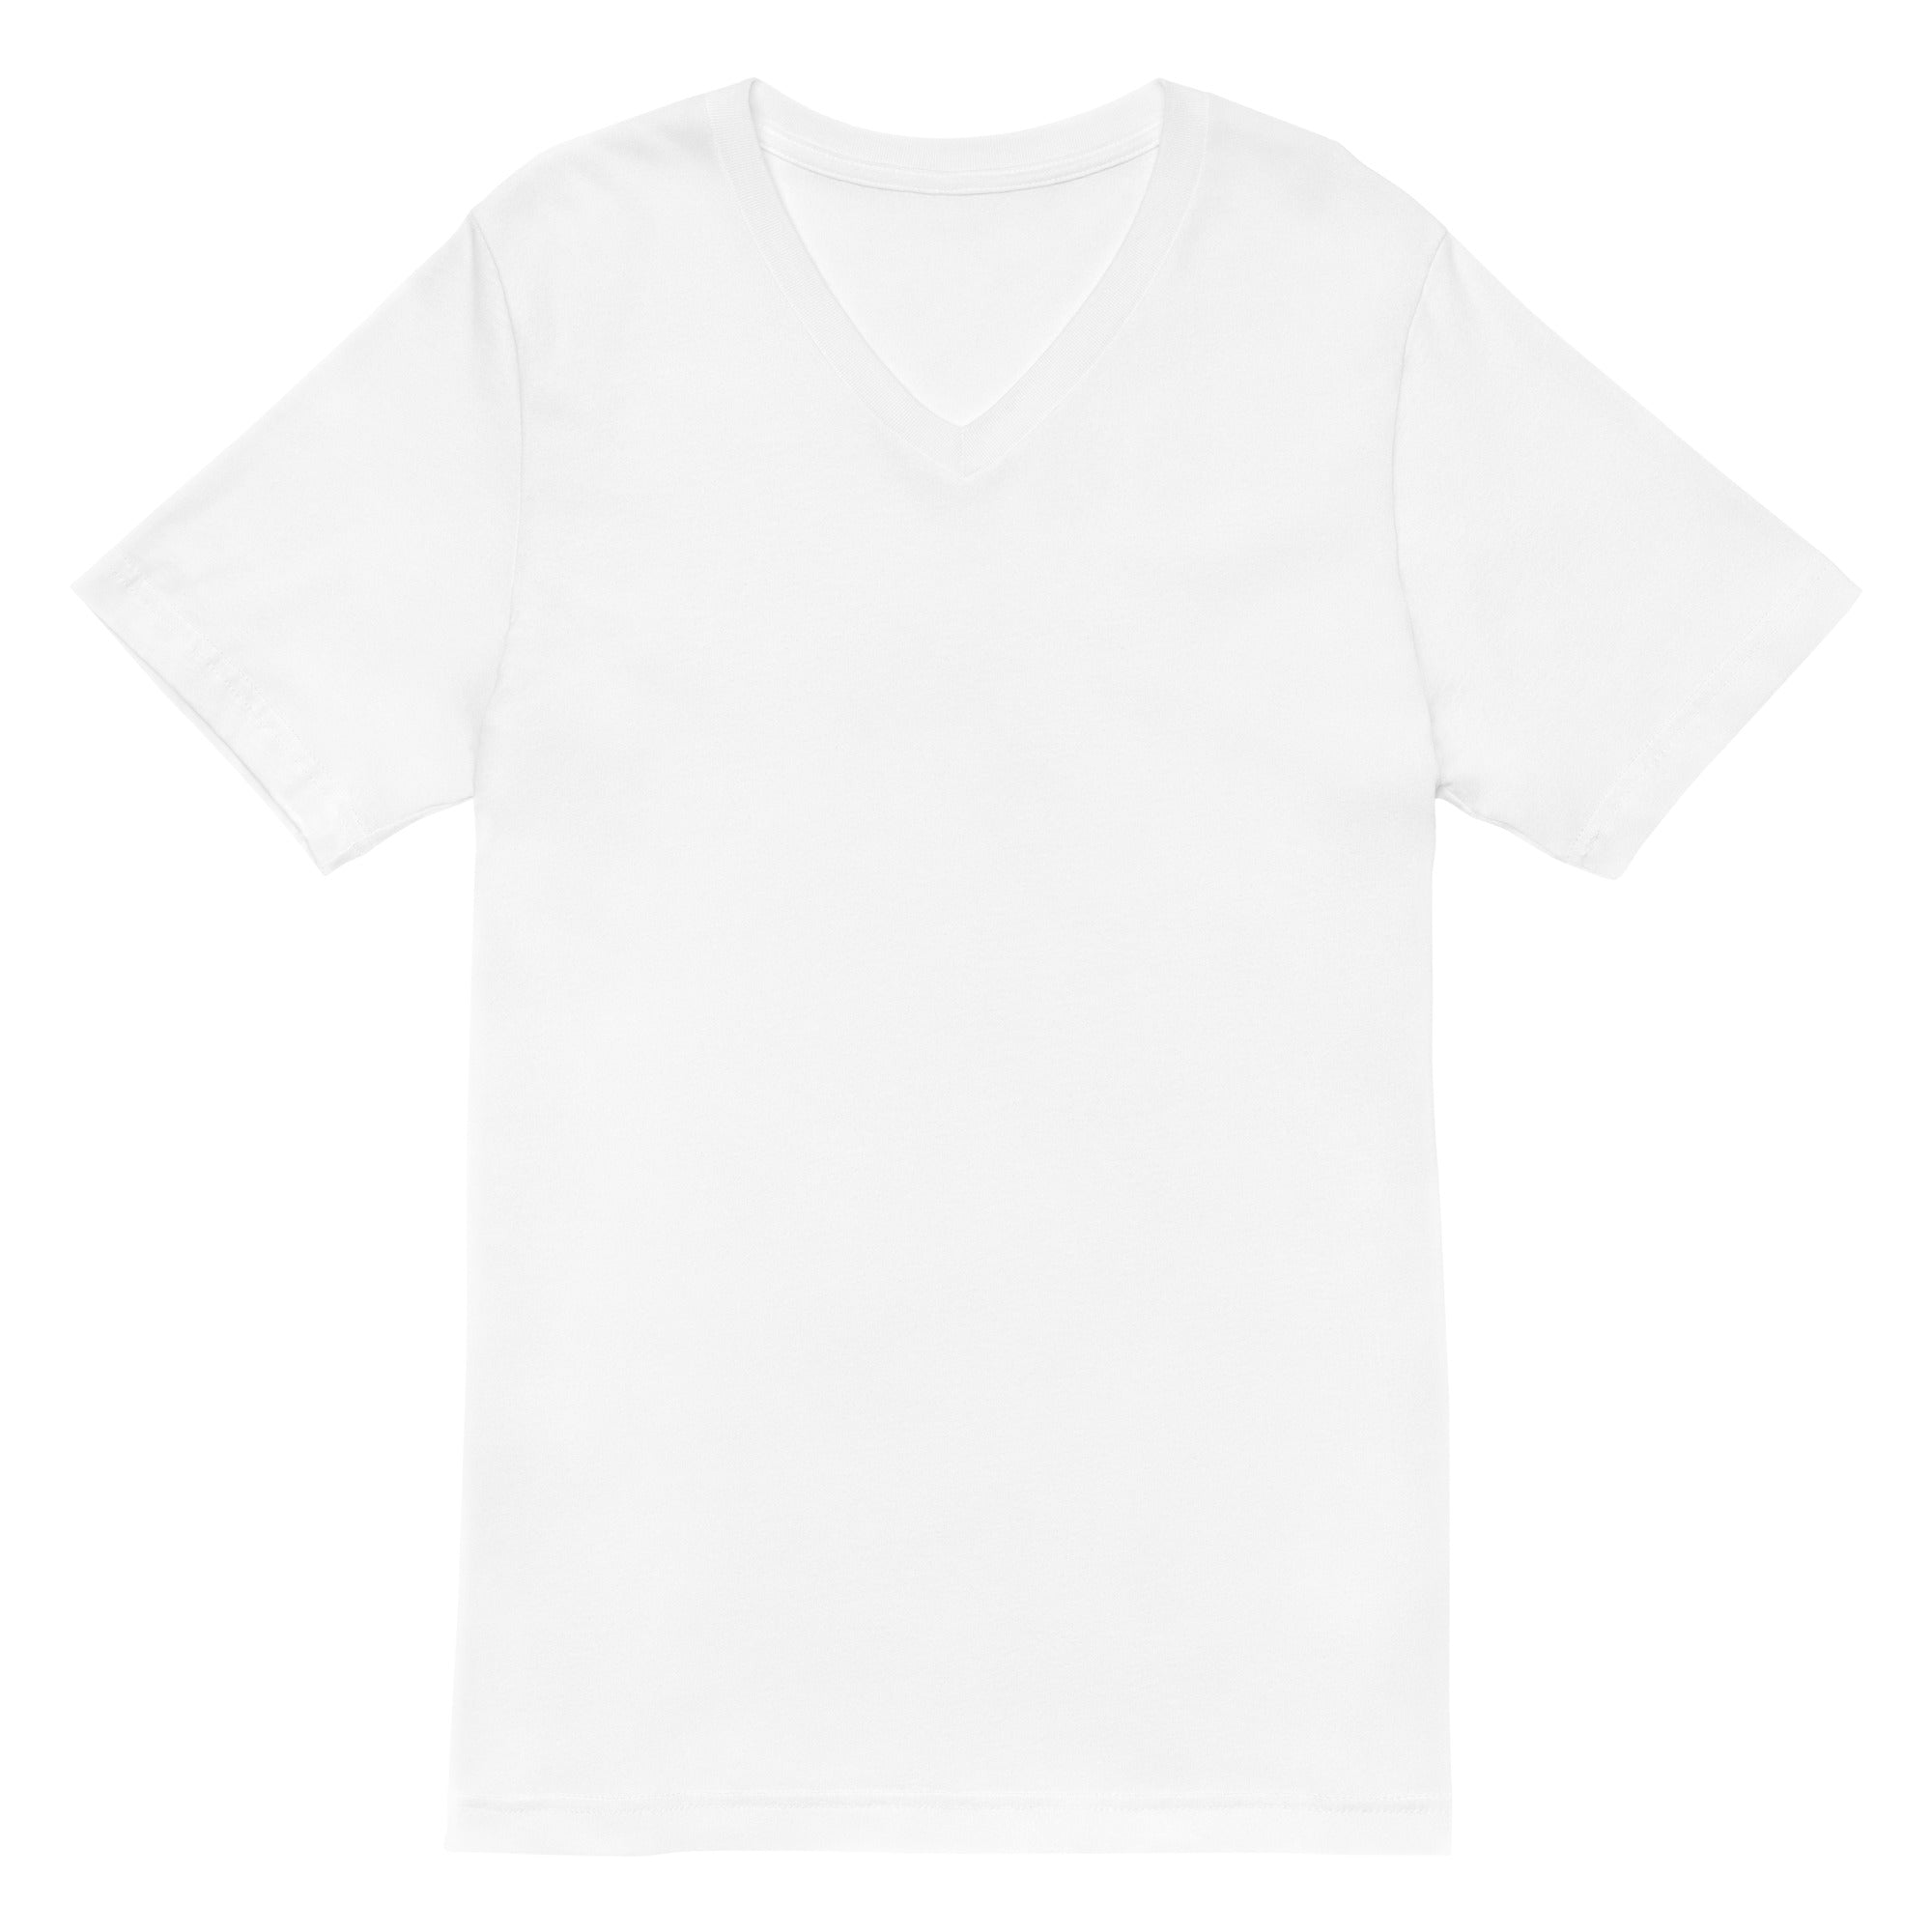 Unisex Short Sleeve V-Neck T-Shirt | There is no spoon